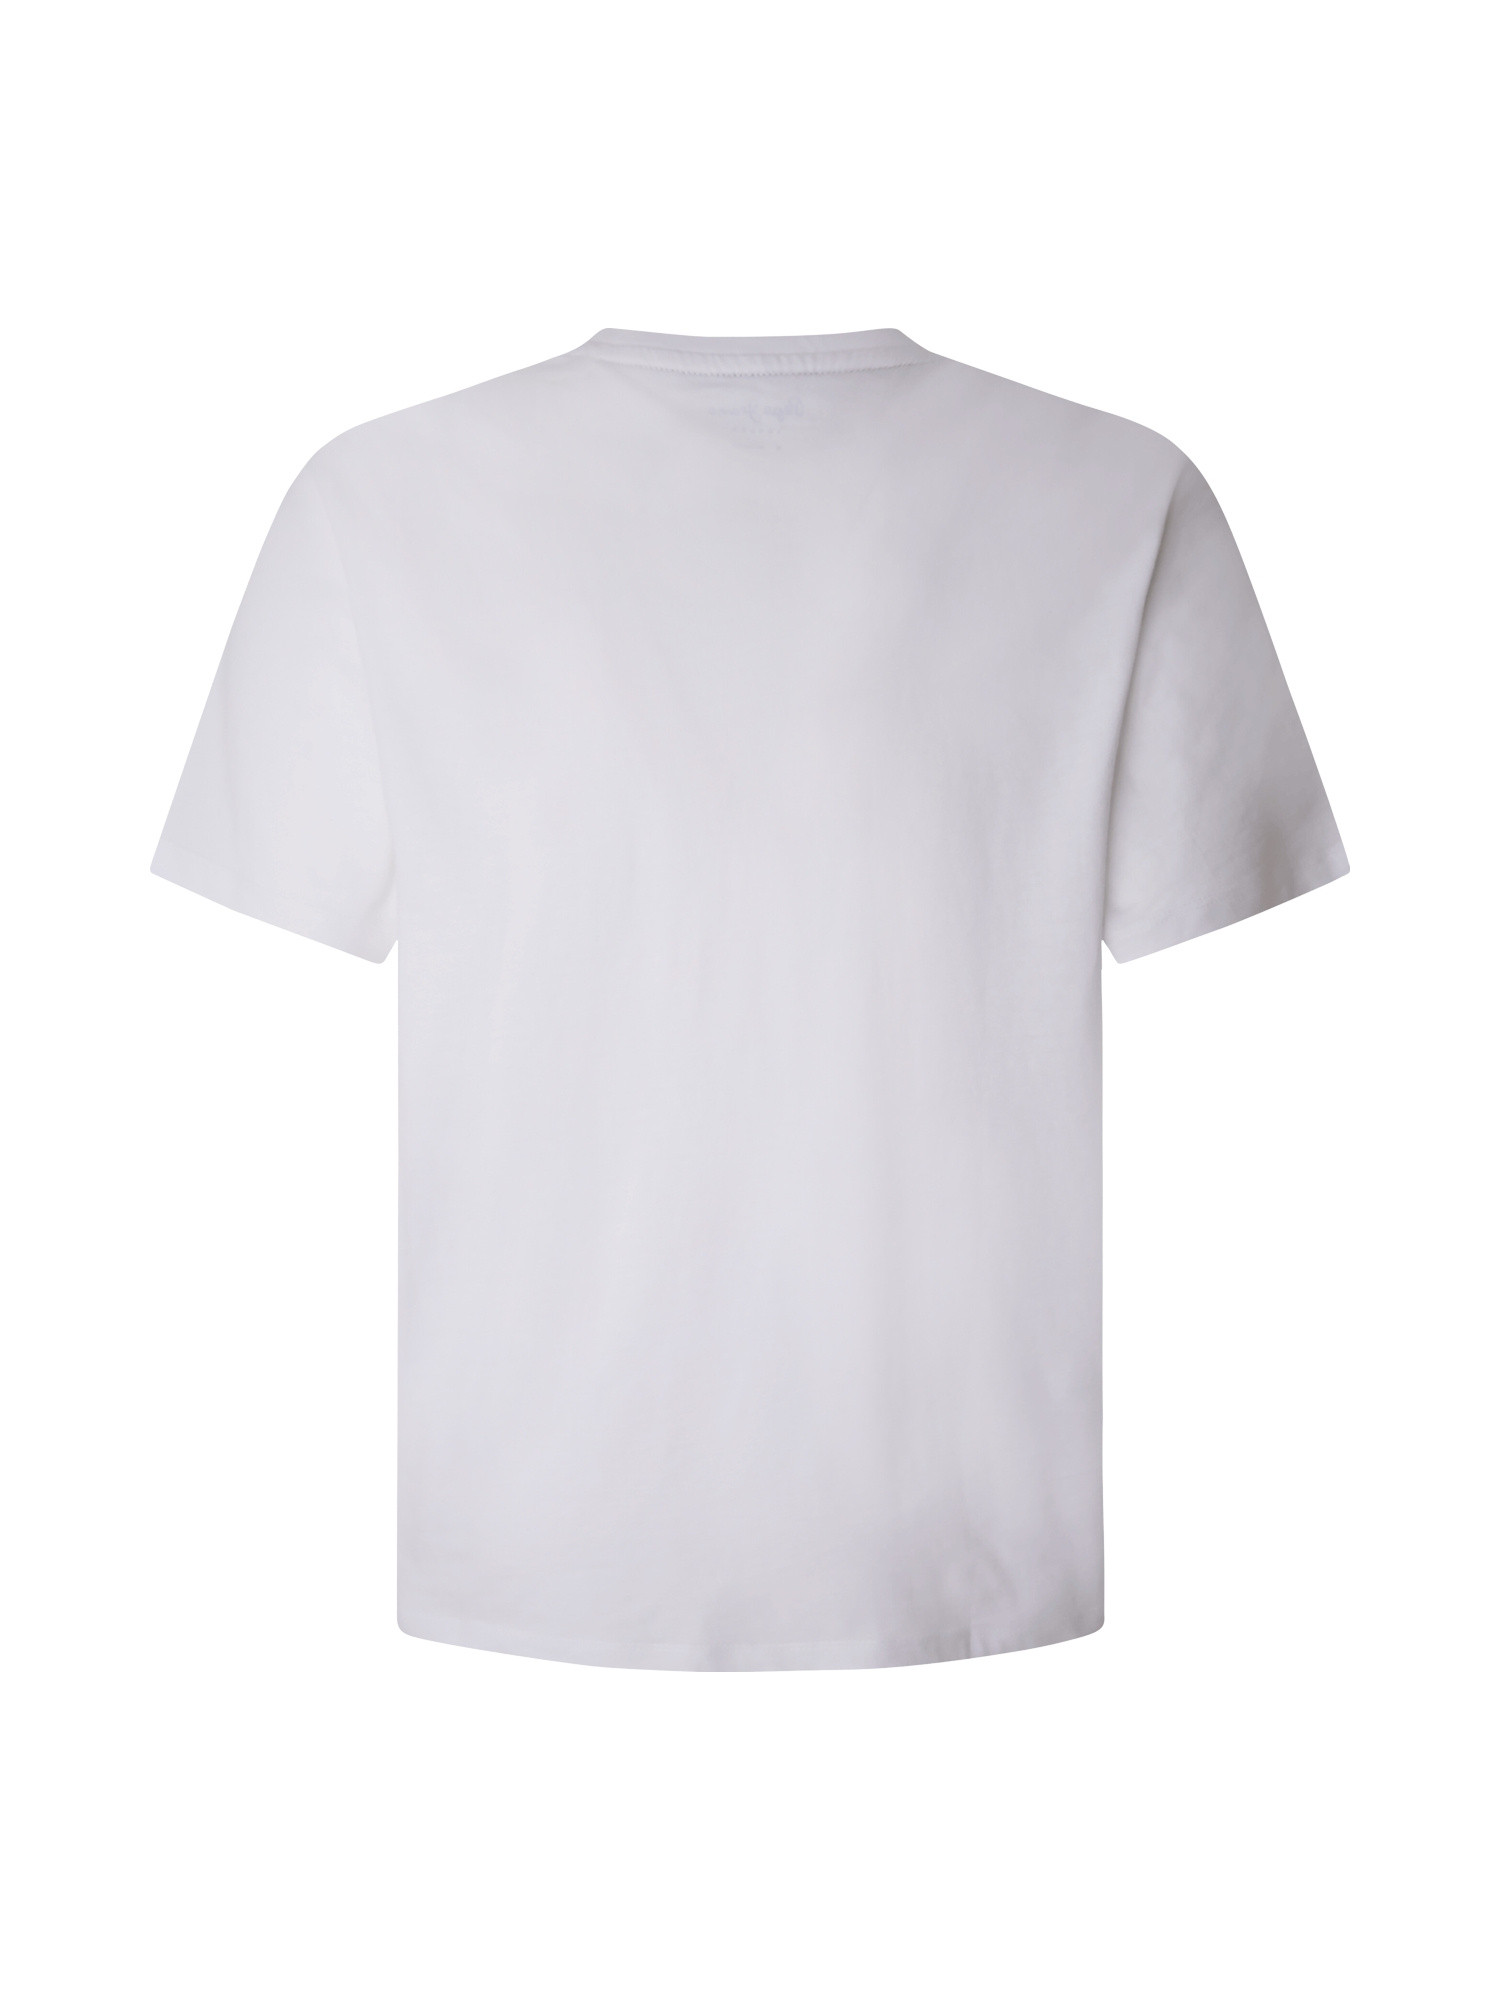 Pepe Jeans - T-shirt con stampa in cotone, Bianco, large image number 1